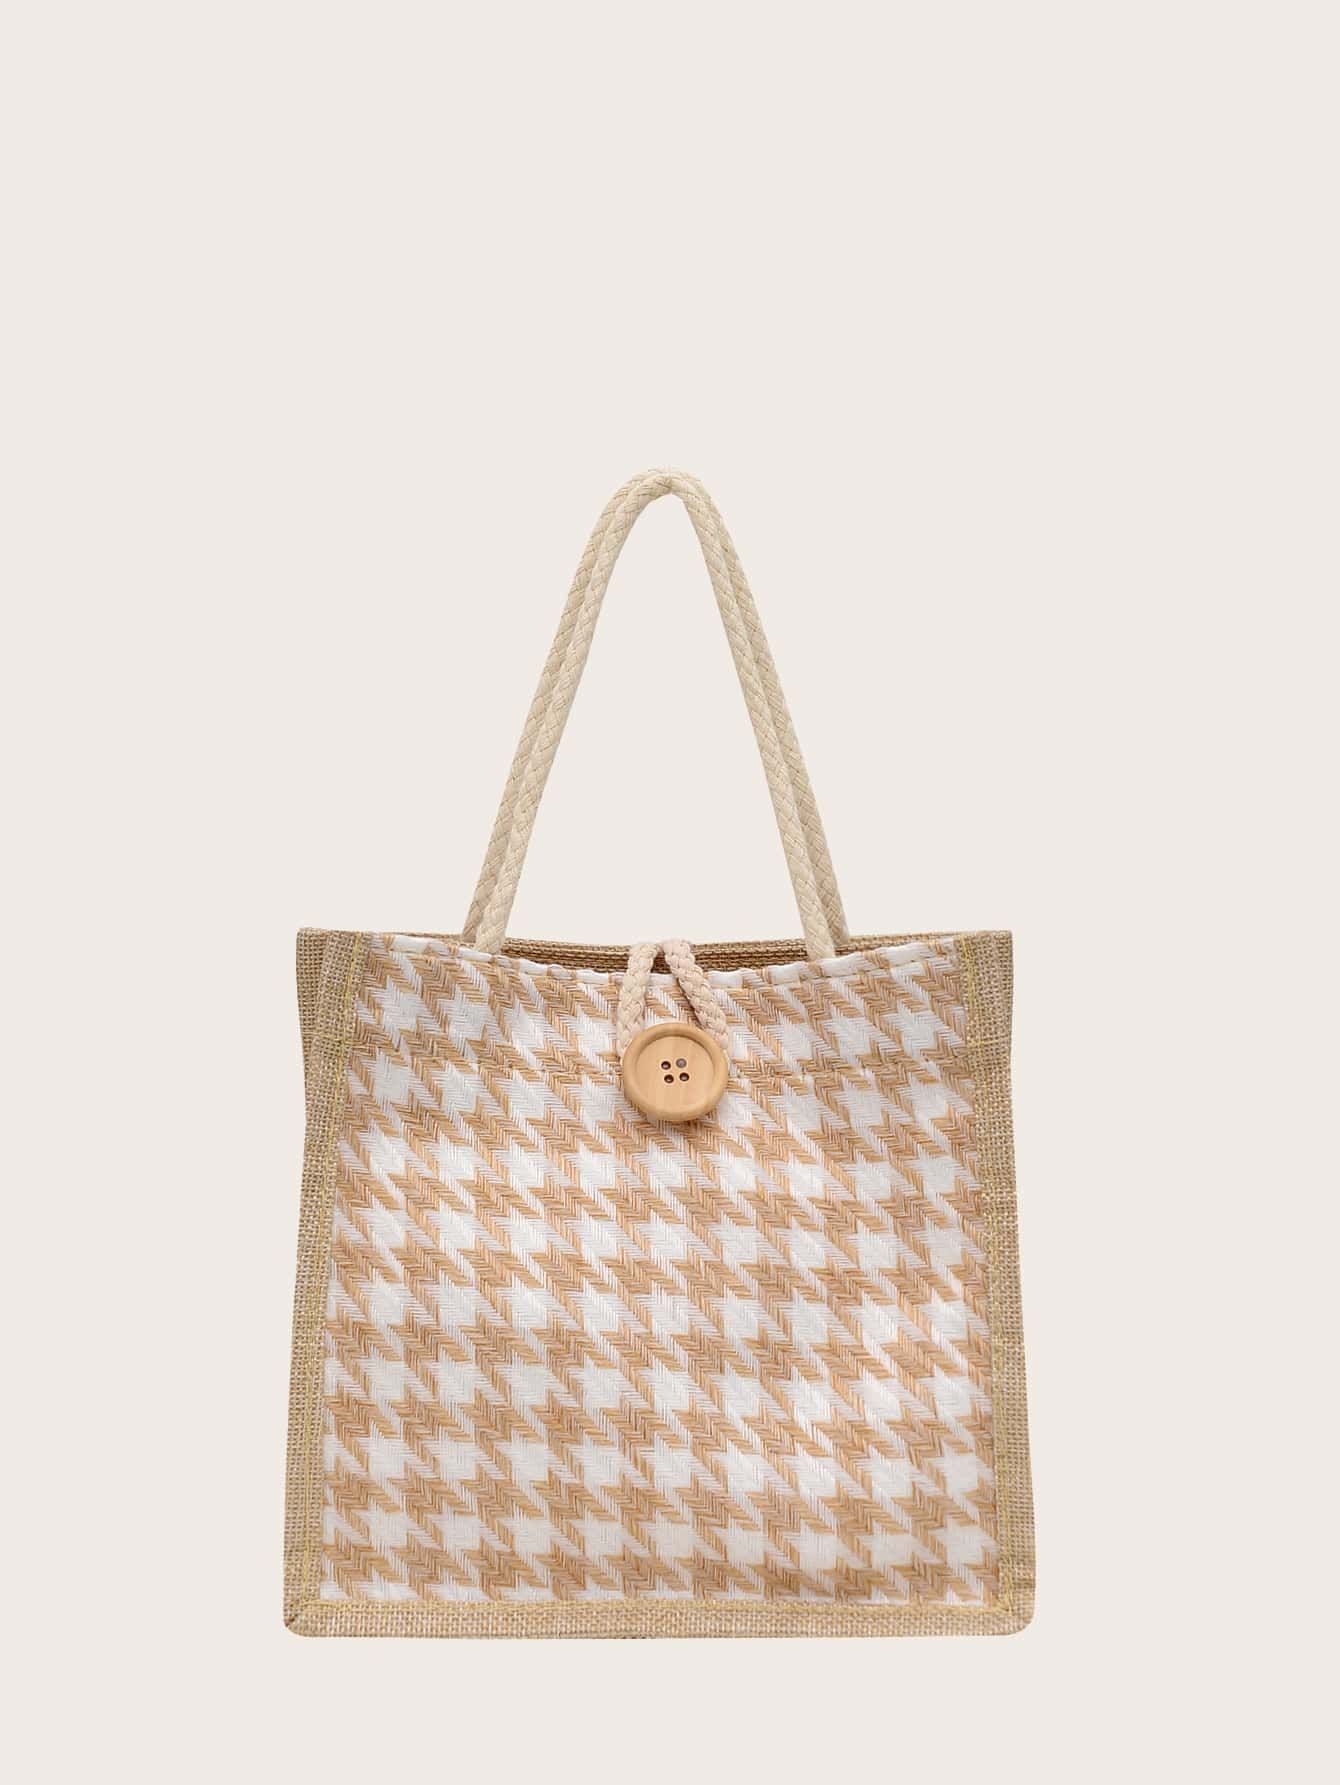 Girls Contrast Binding Houndstooth Pattern Square Bag | SHEIN